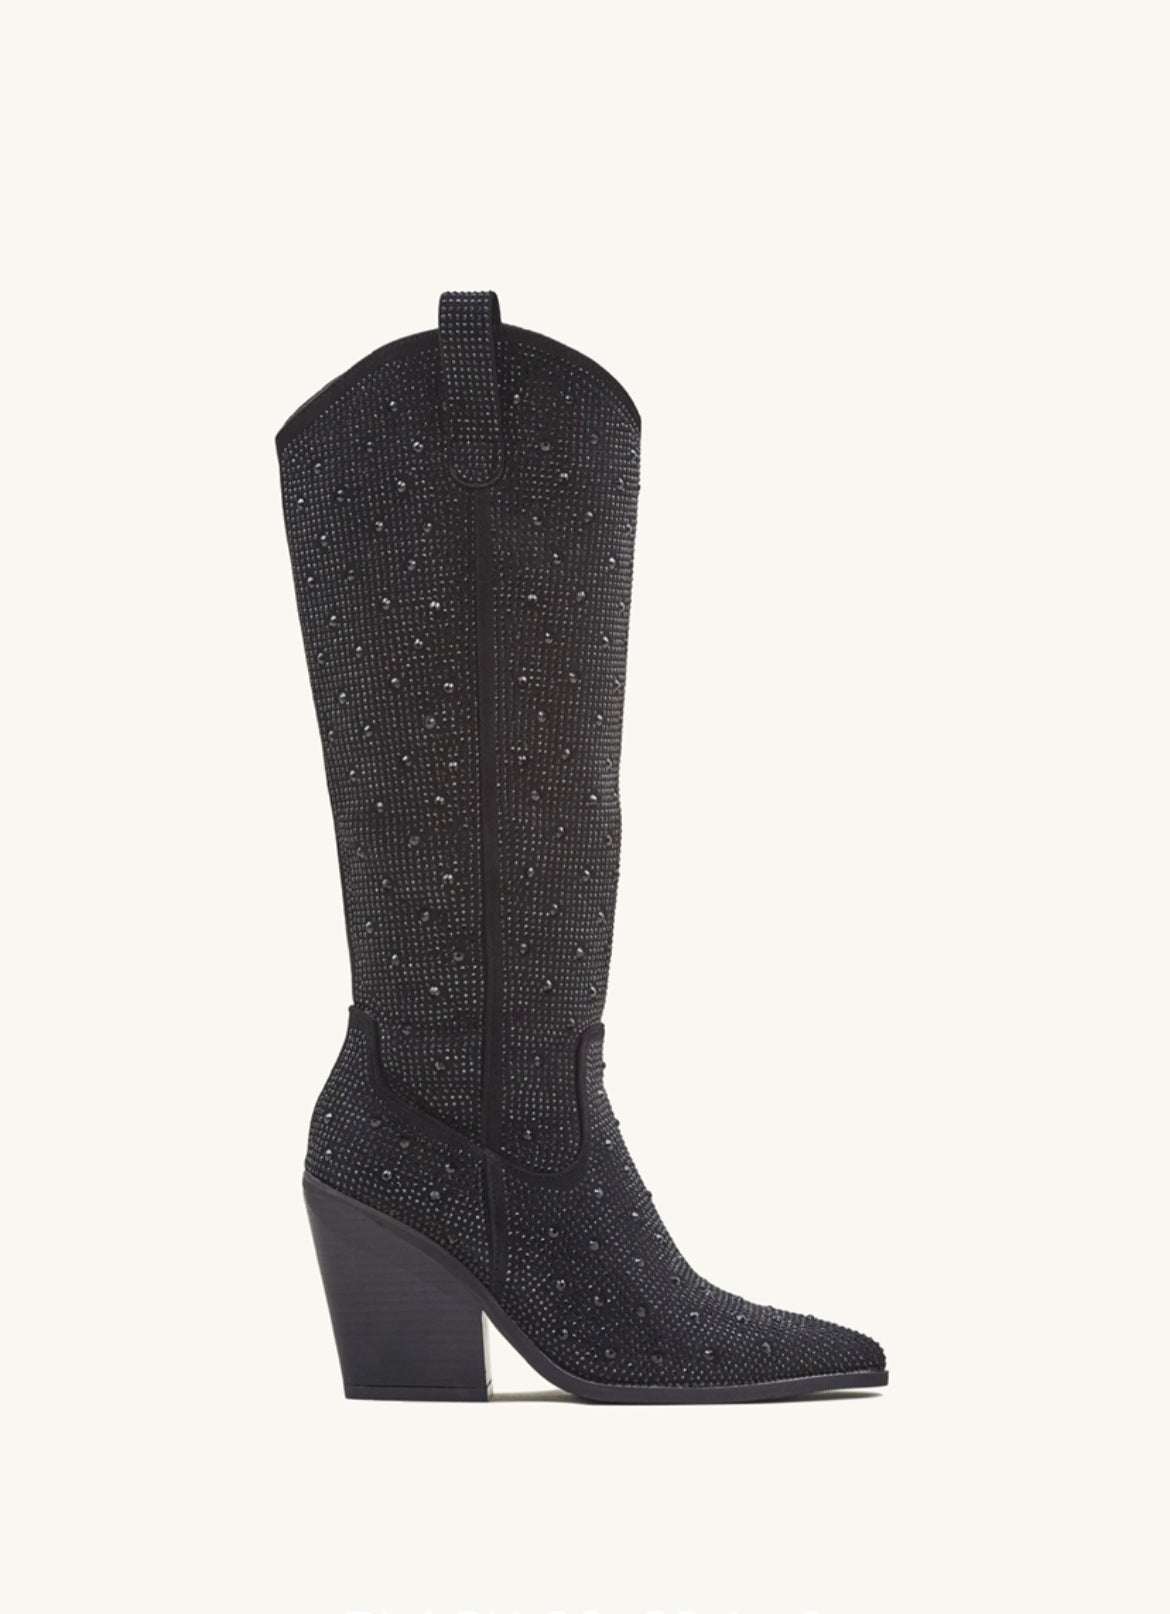 Swifty Sparkly High Boot